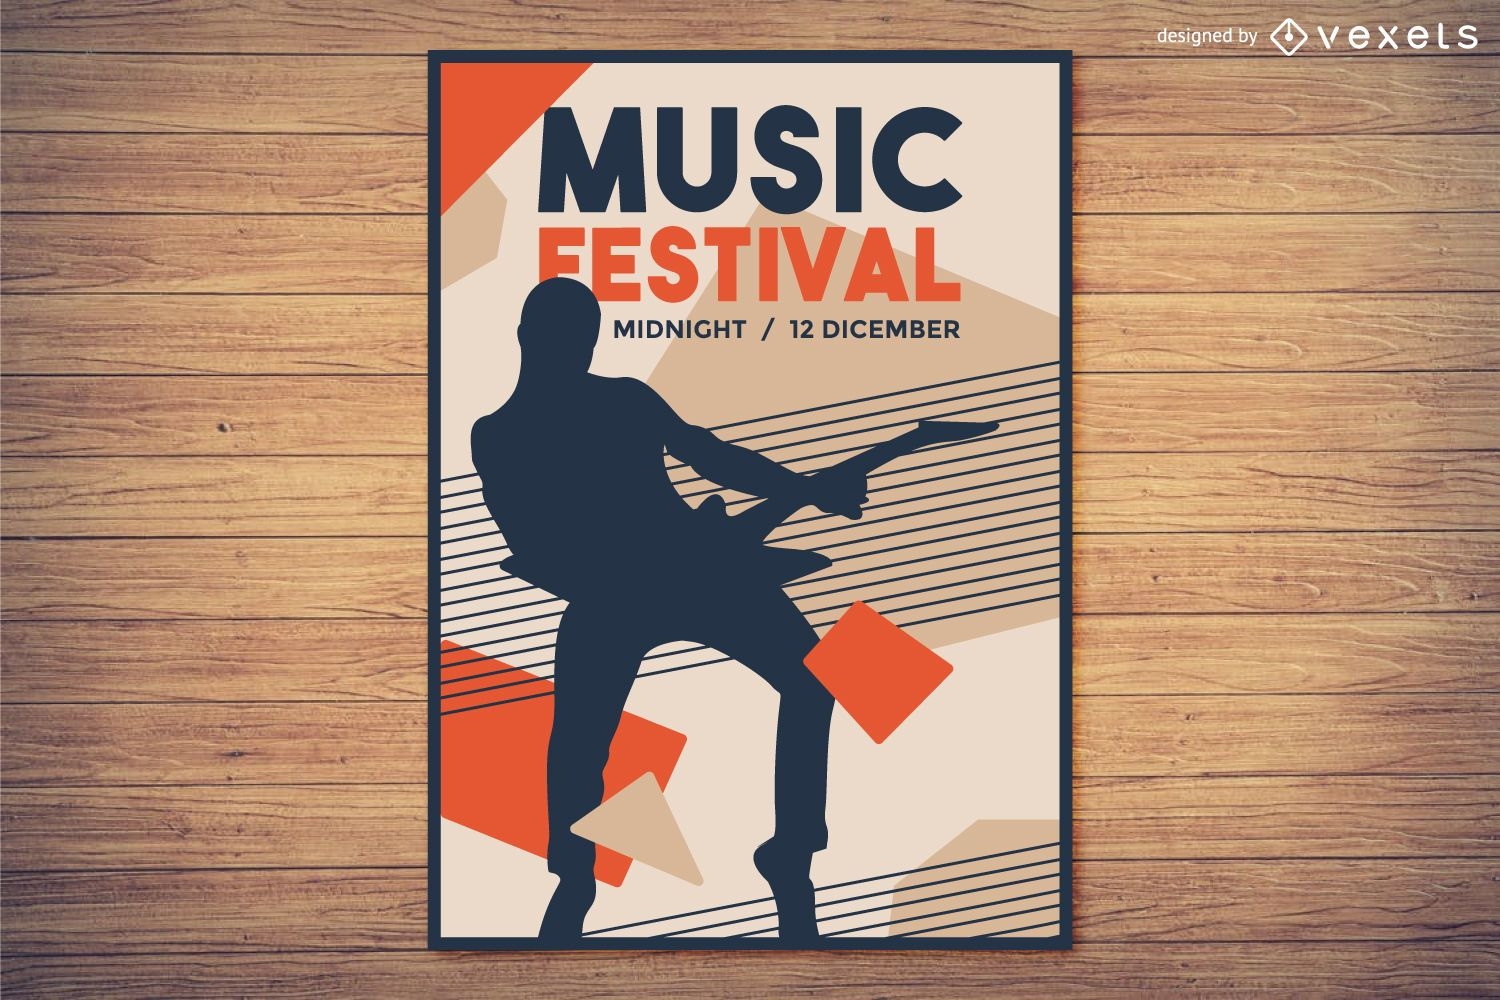 Music Festival poster design with silhouette